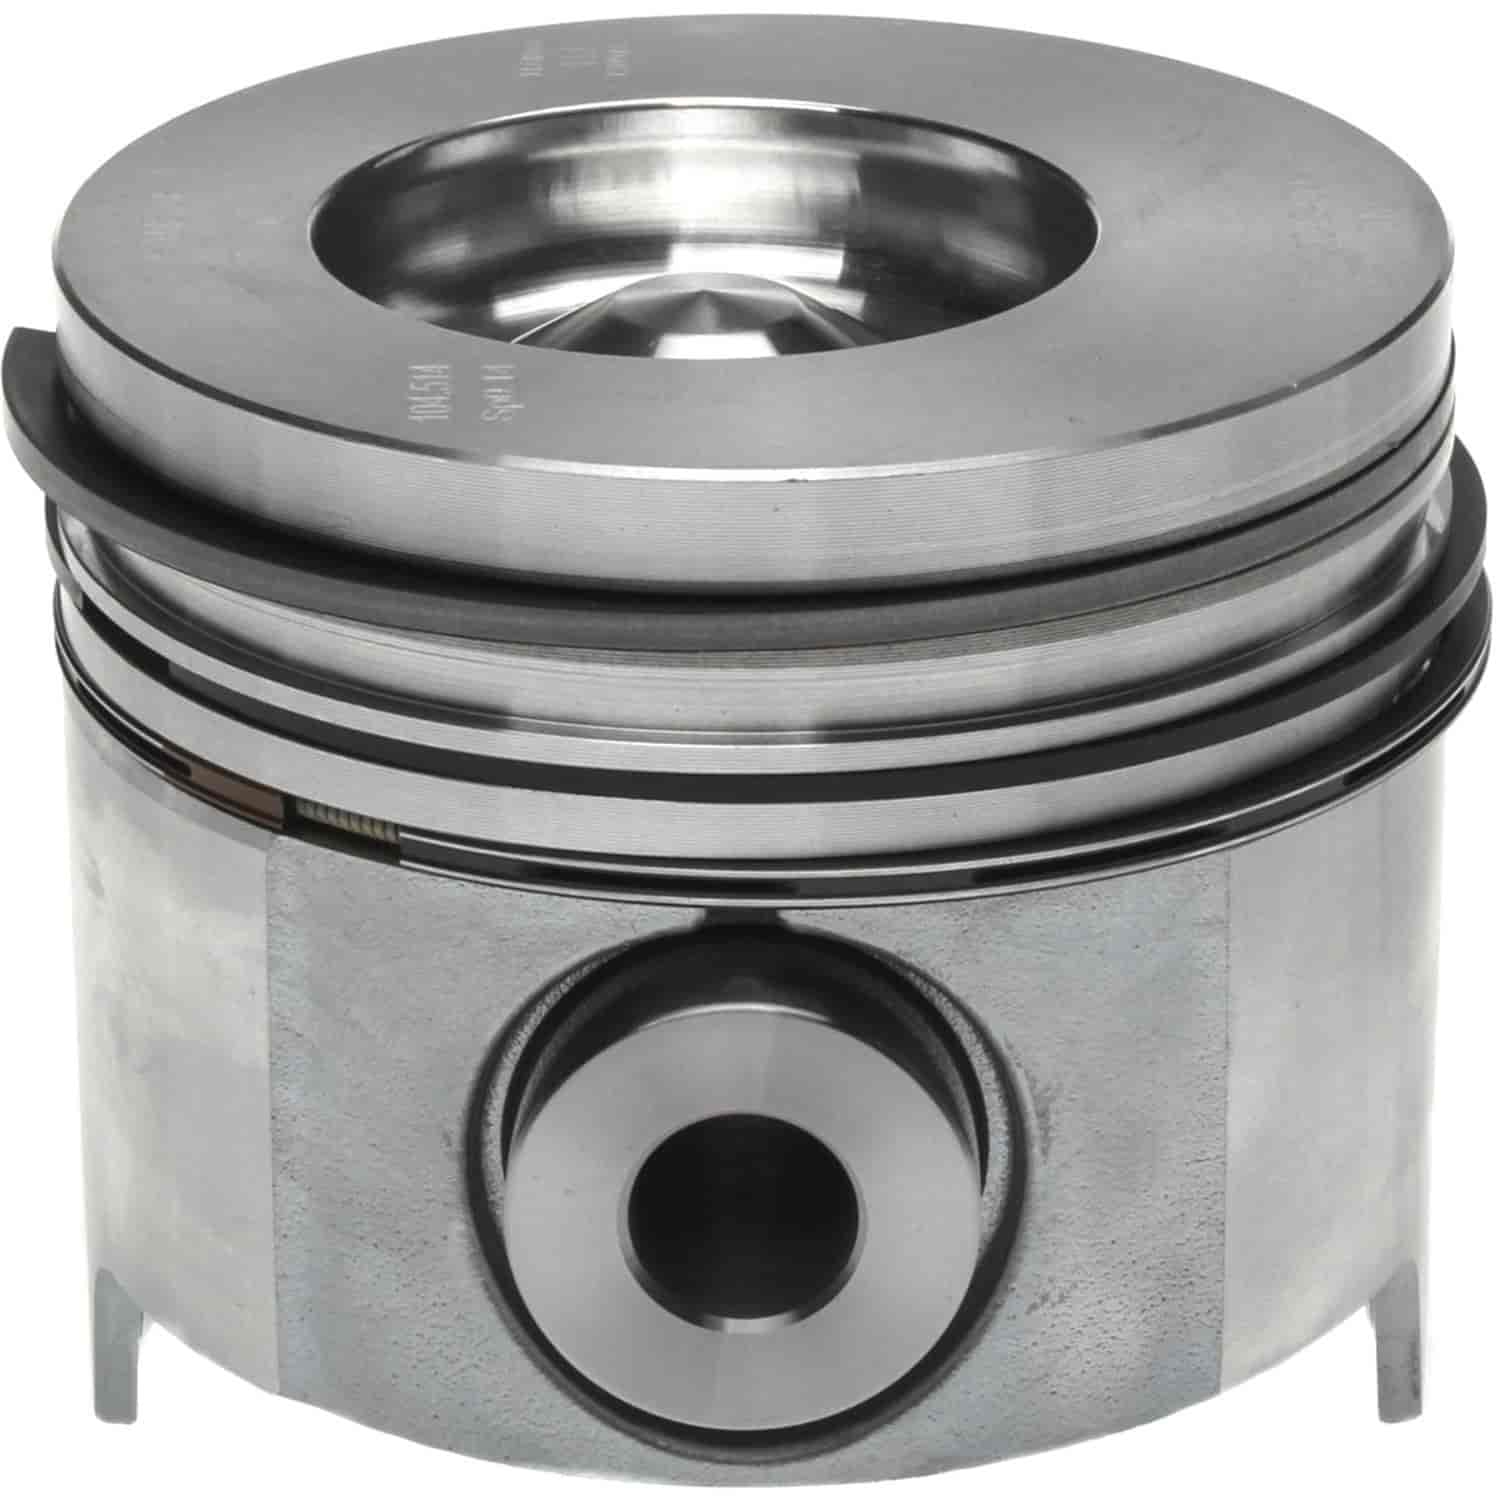 Piston With Rings 2001-2005 Chevy/GMC Duramax Diesel V8 6.6L Left Bank with 4.075" Bore (+.020")